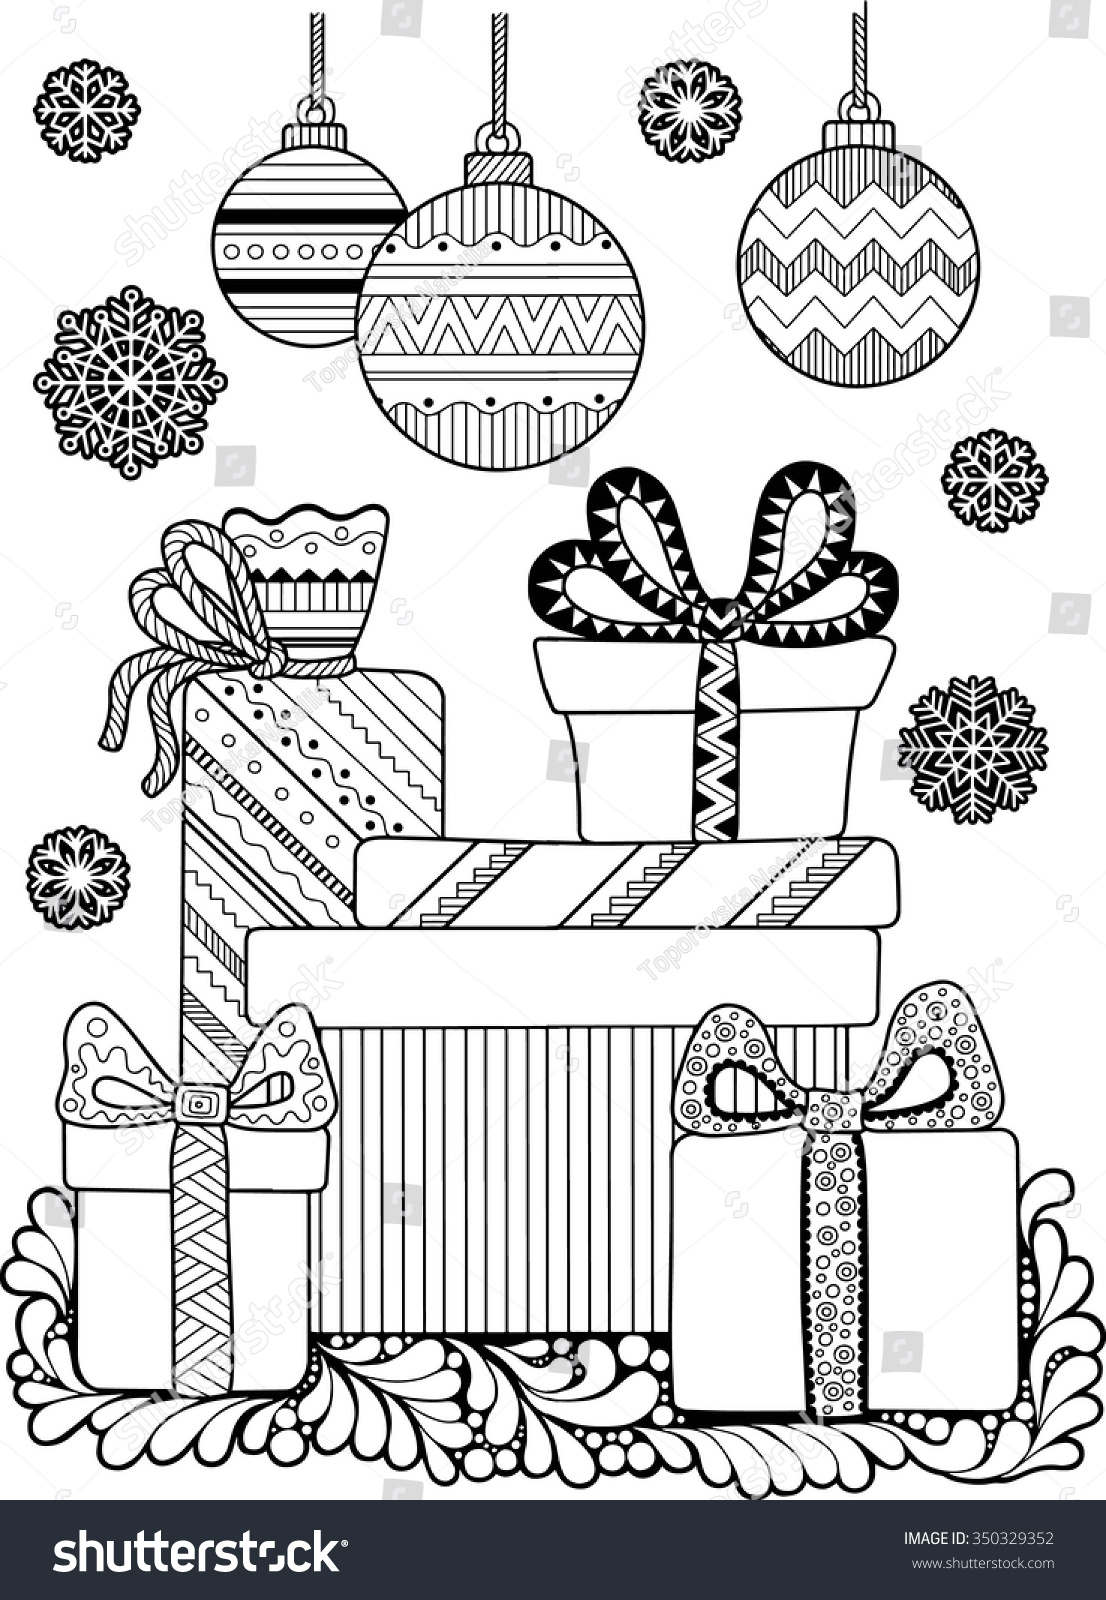 Christmas Coloring Book Stock Vector Illustration 350329352  Shutterstock